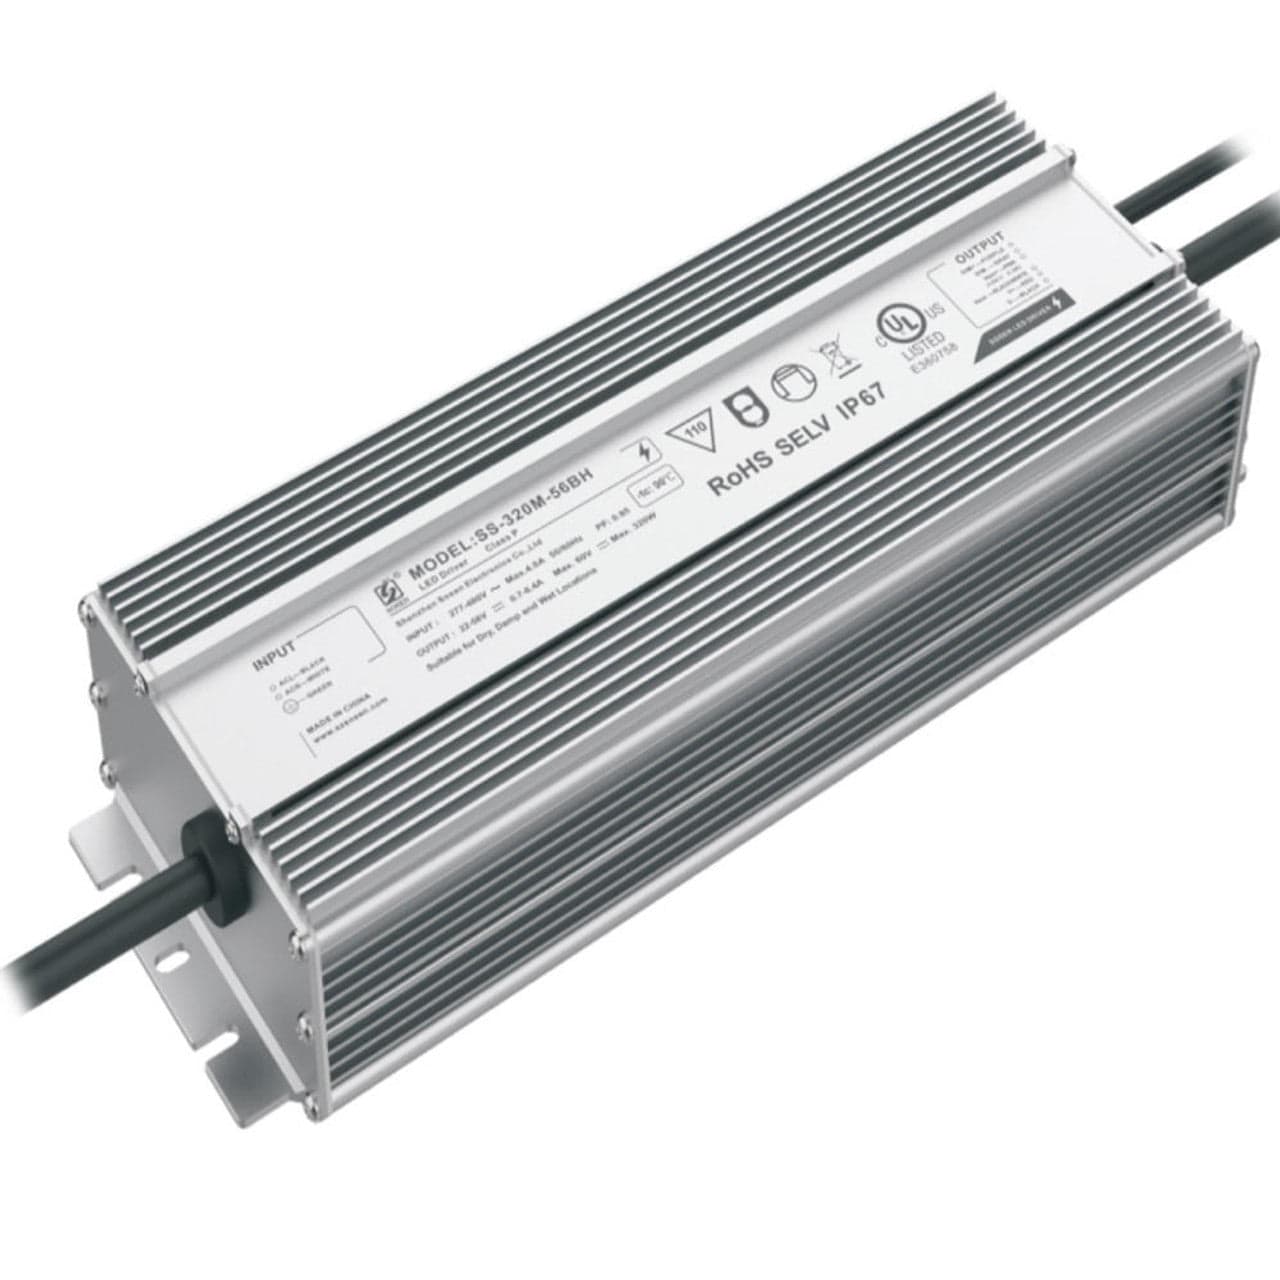 300W Sosen LED Driver - 277-480VAC Dimmable - 56VDC